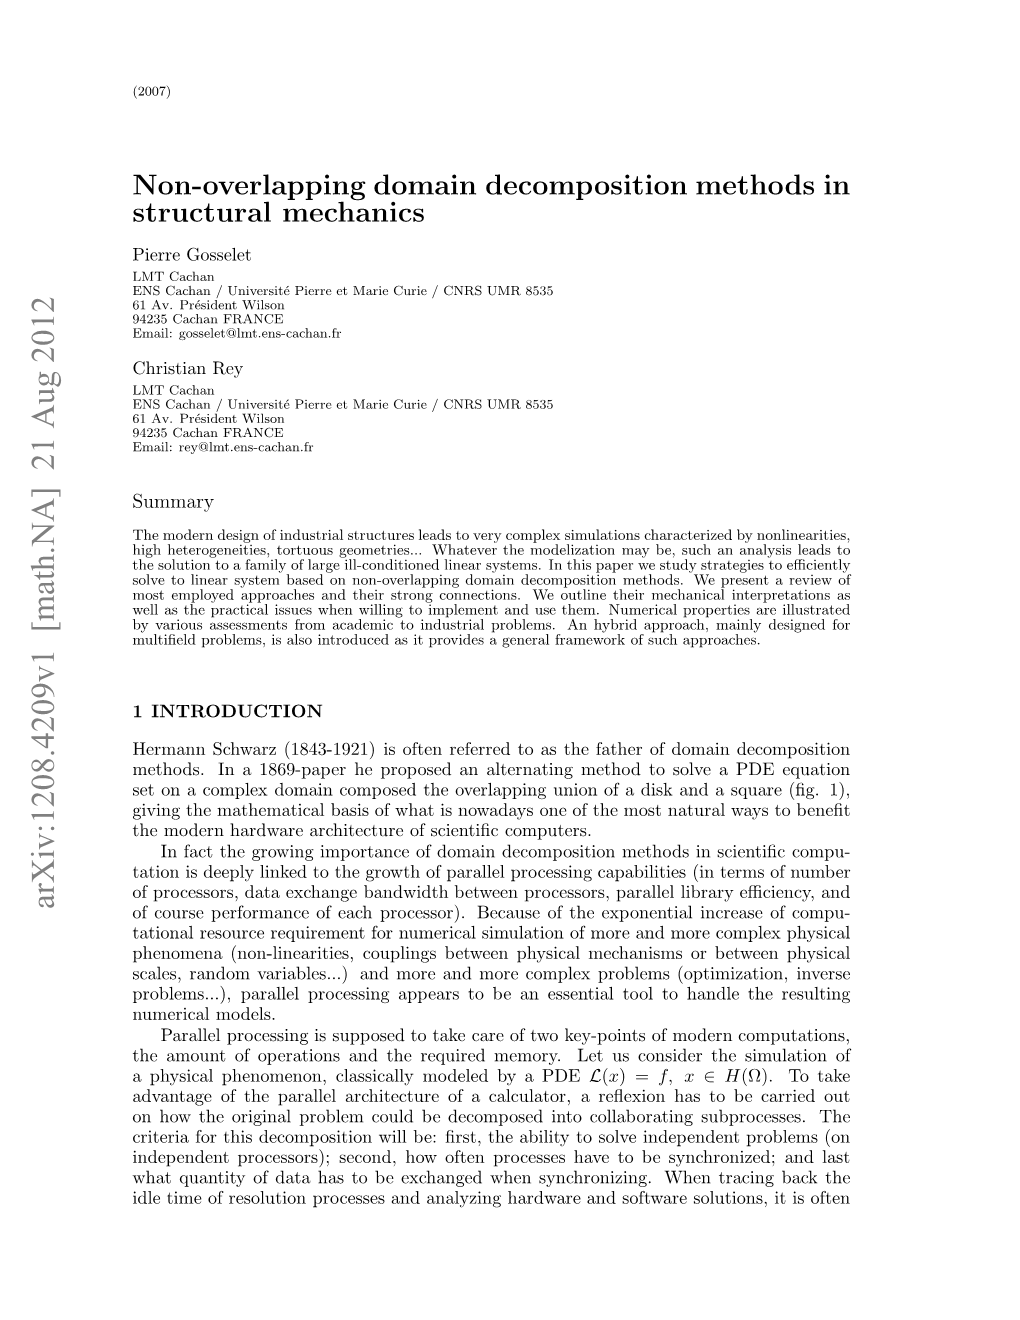 Non-Overlapping Domain Decomposition Methods in Structural Mechanics 3 Been Extensively Studied